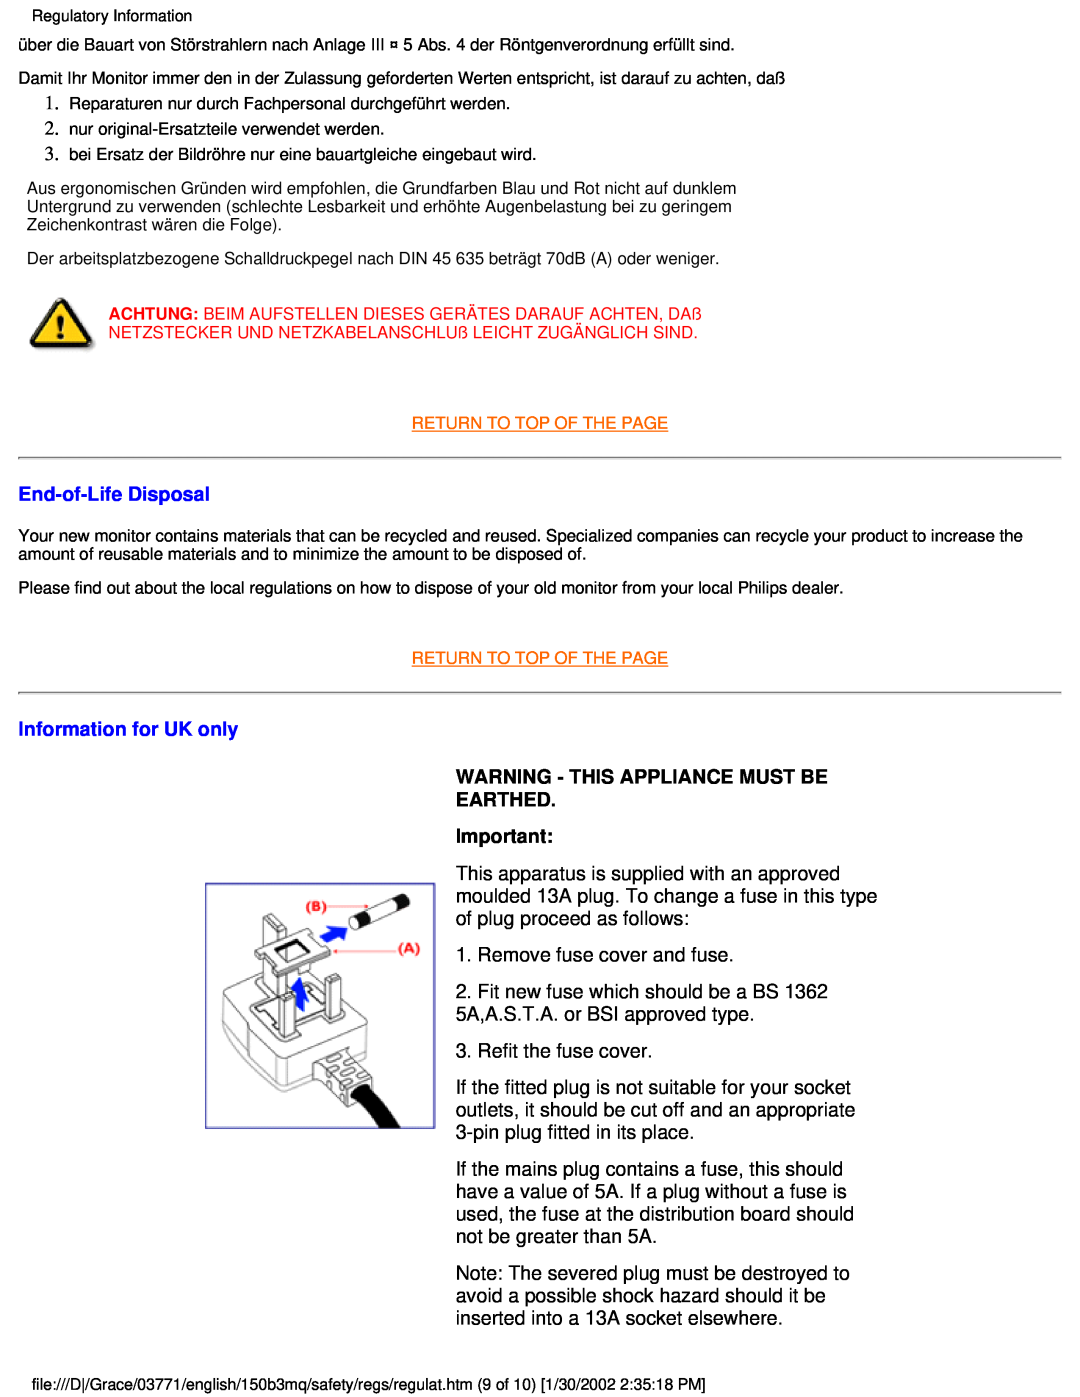 Philips 150B3M/150B3Q user manual End-of-LifeDisposal, Information for UK only, Warning - This Appliance Must Be Earthed 